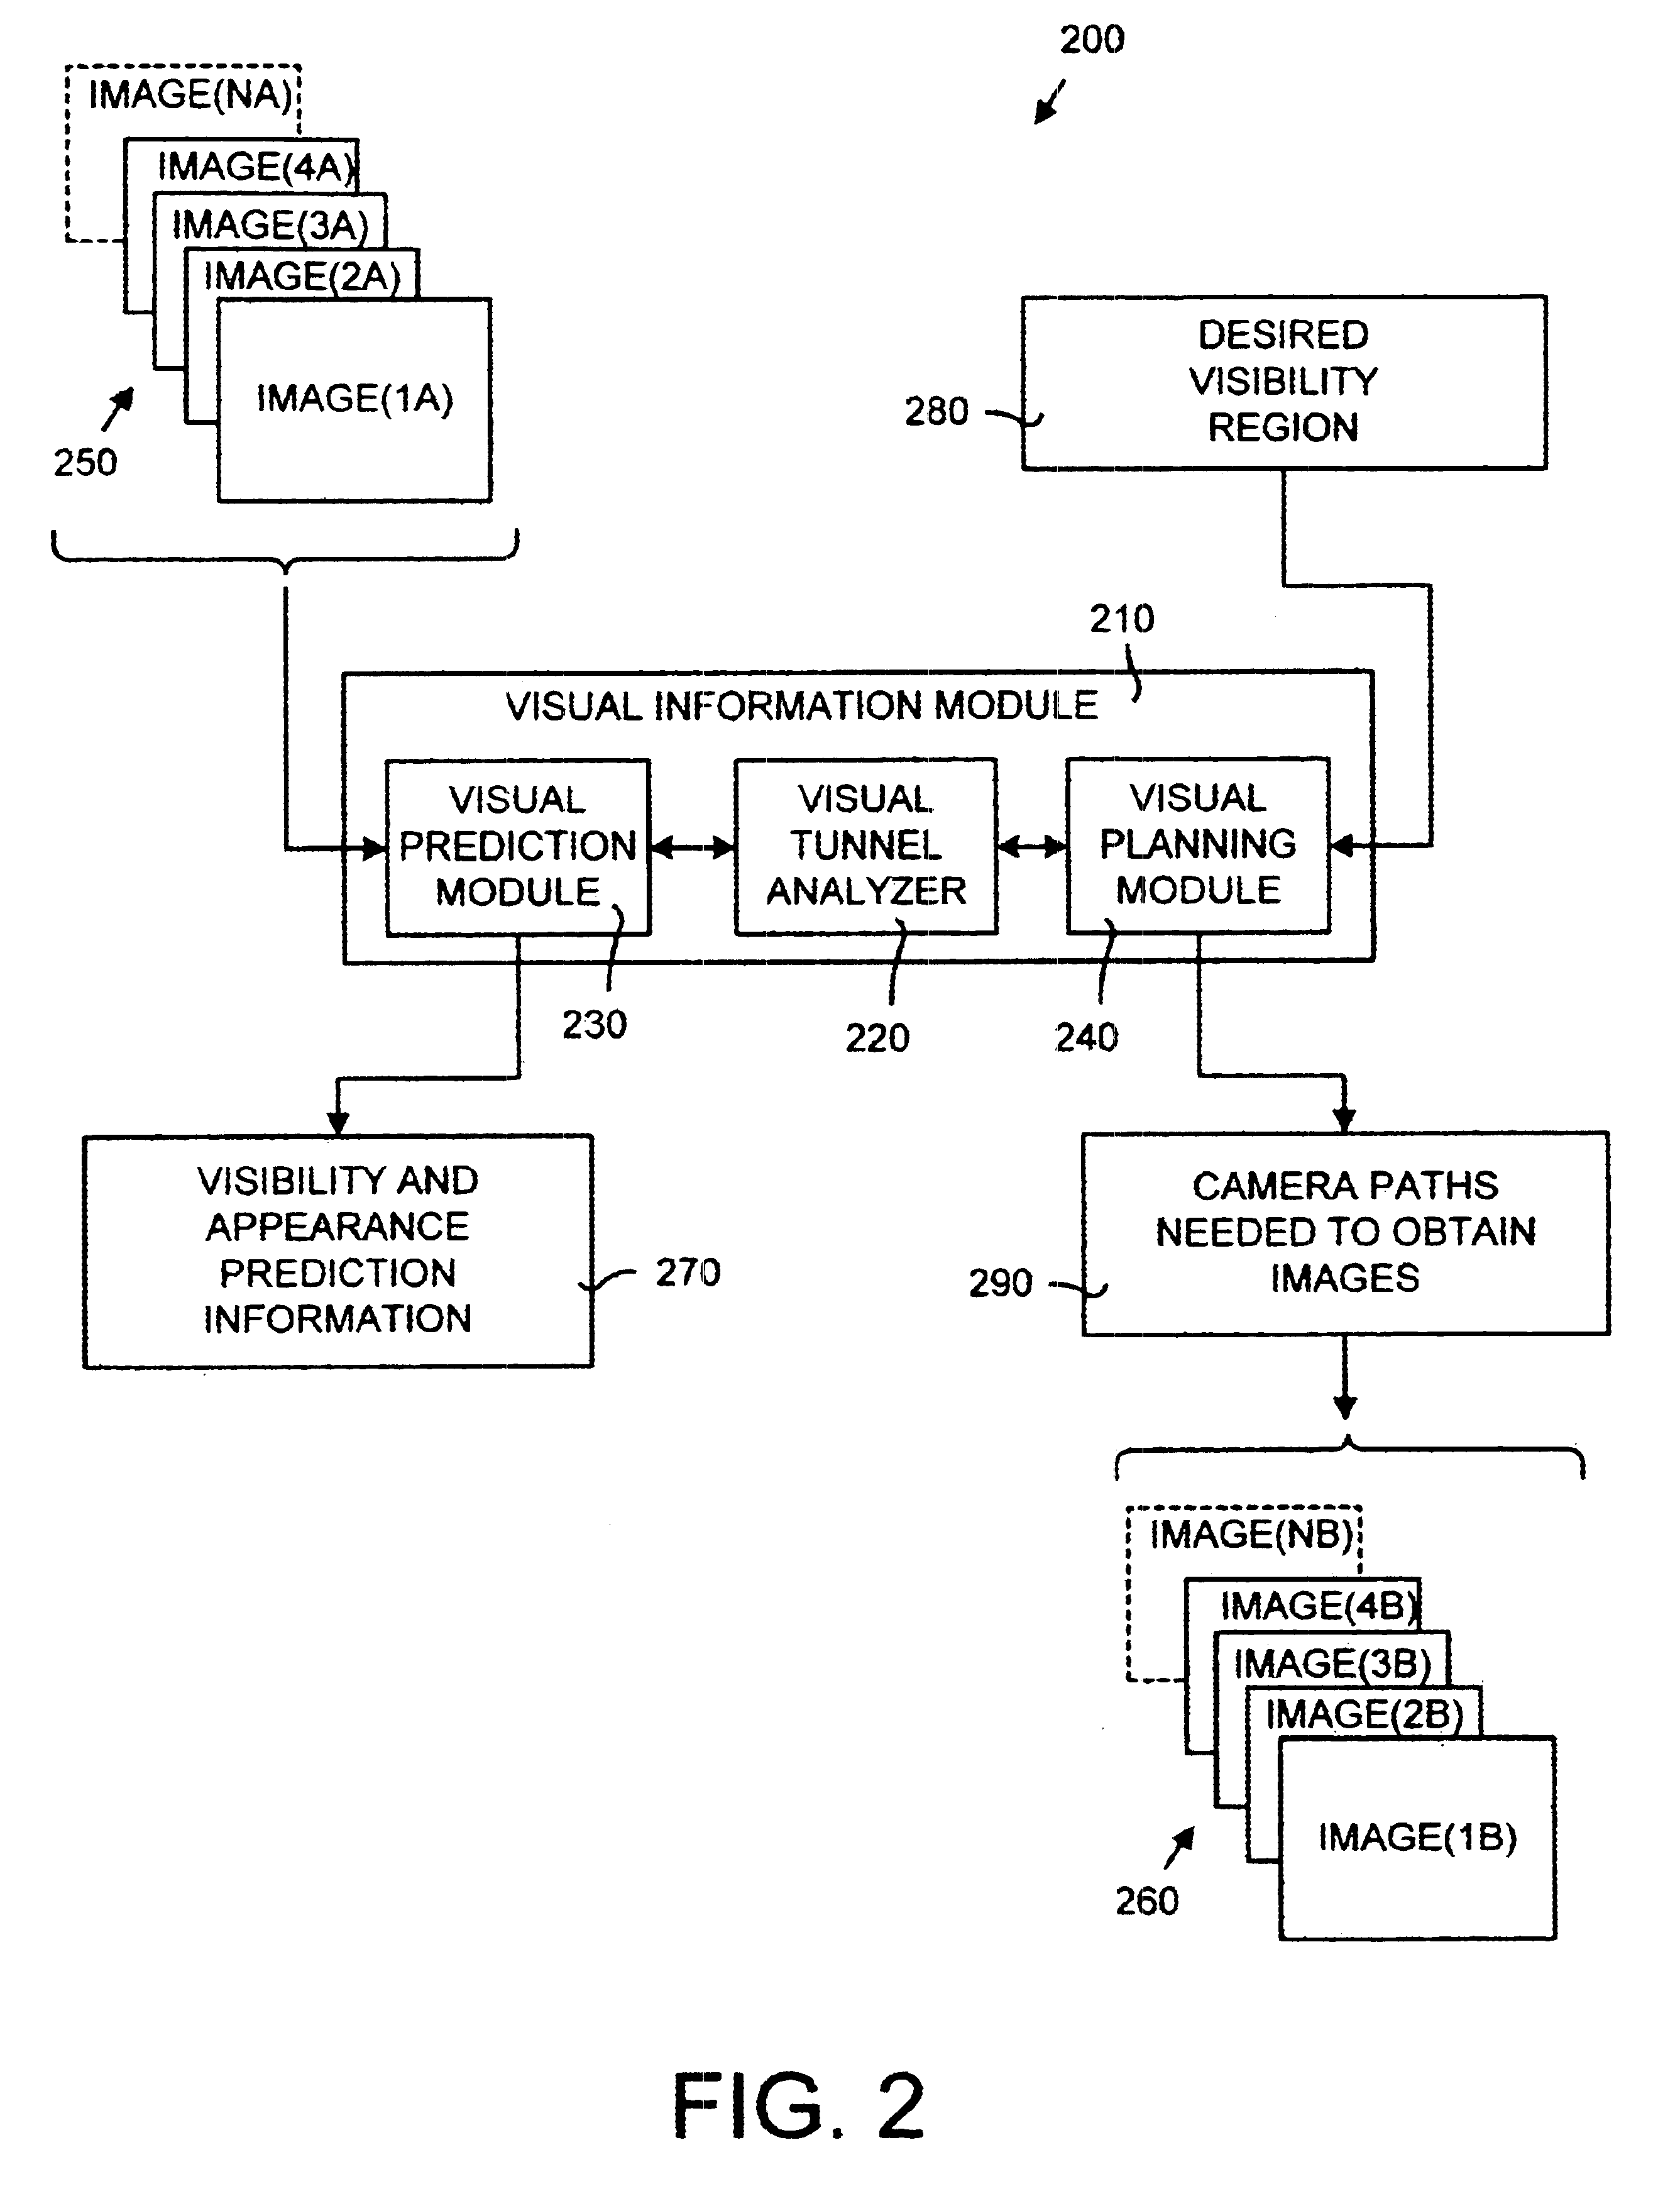 Method and system for obtaining visual information from an image sequence using visual tunnel analysis